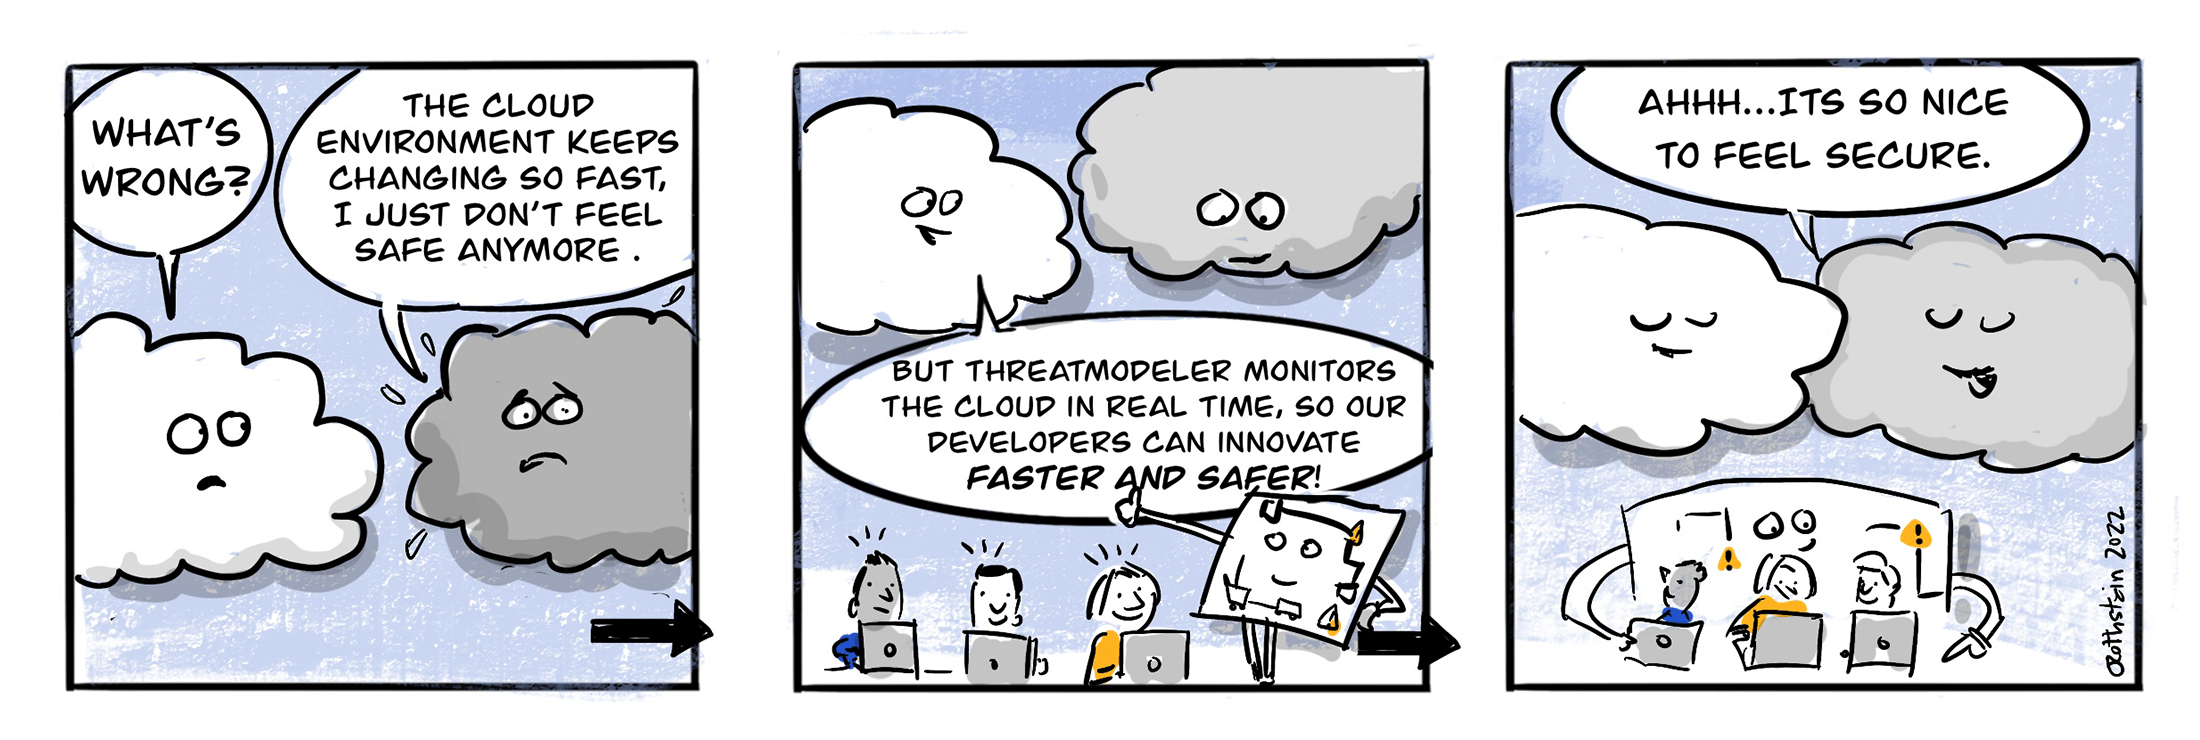 Three panel cartoon about cloud security